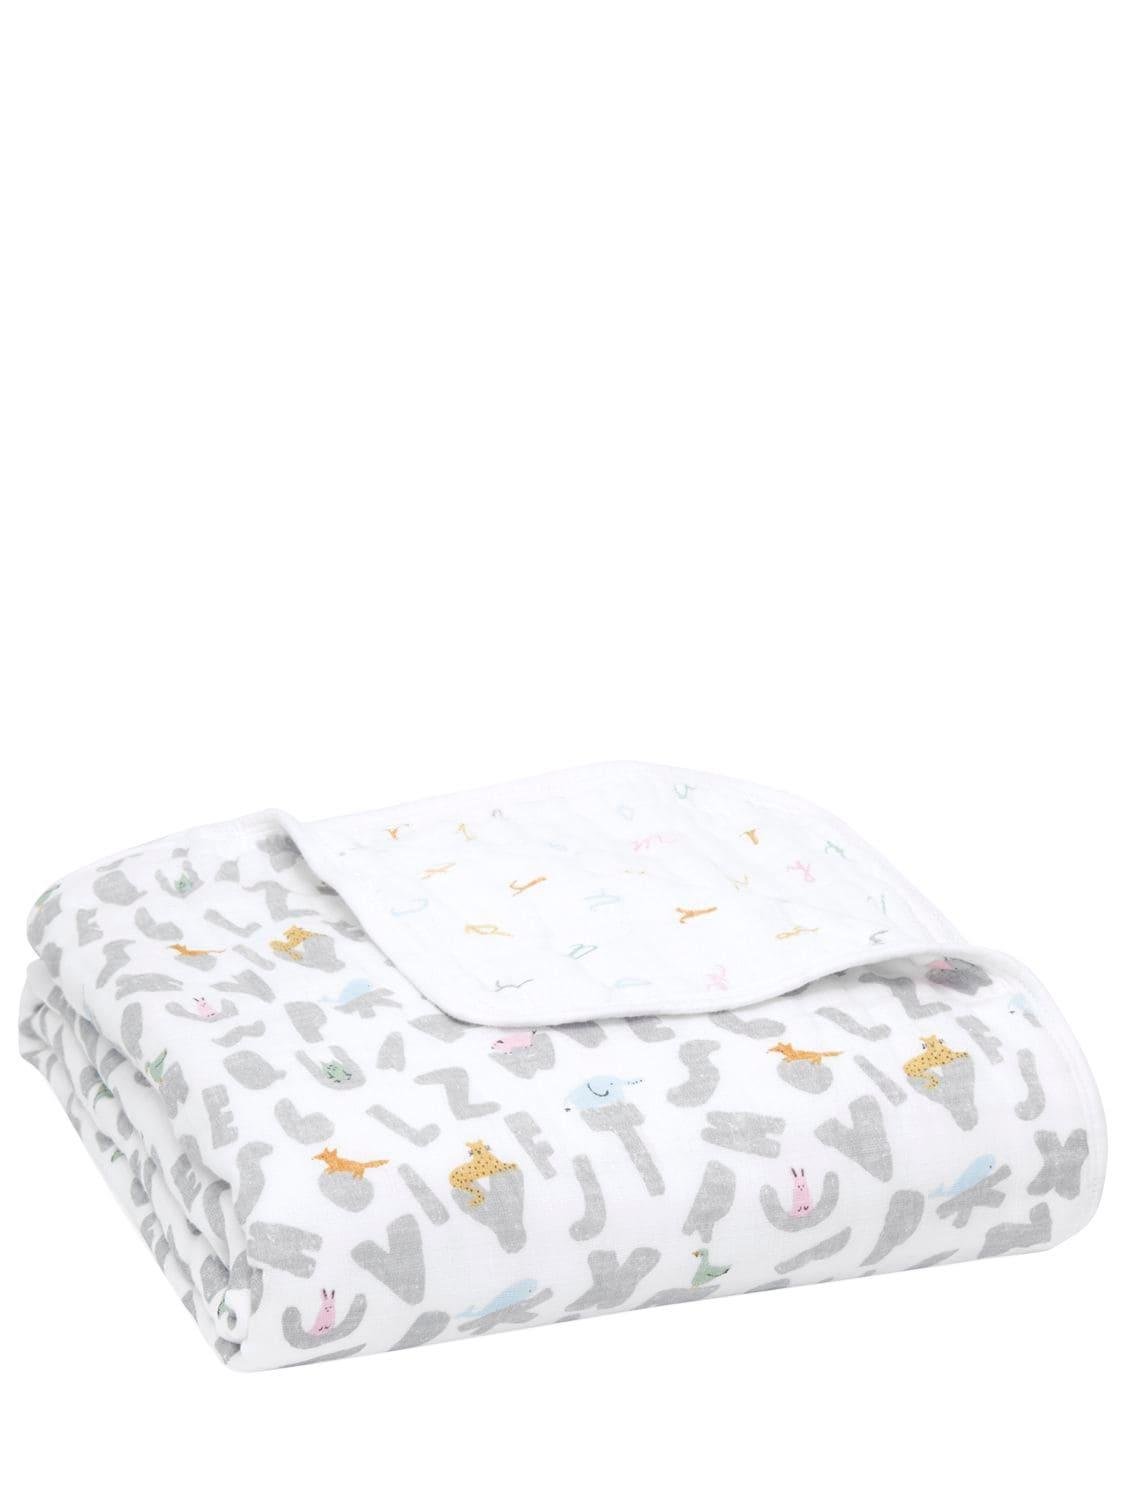 Printed Cotton Muslin Blanket by ADEN + ANAIS